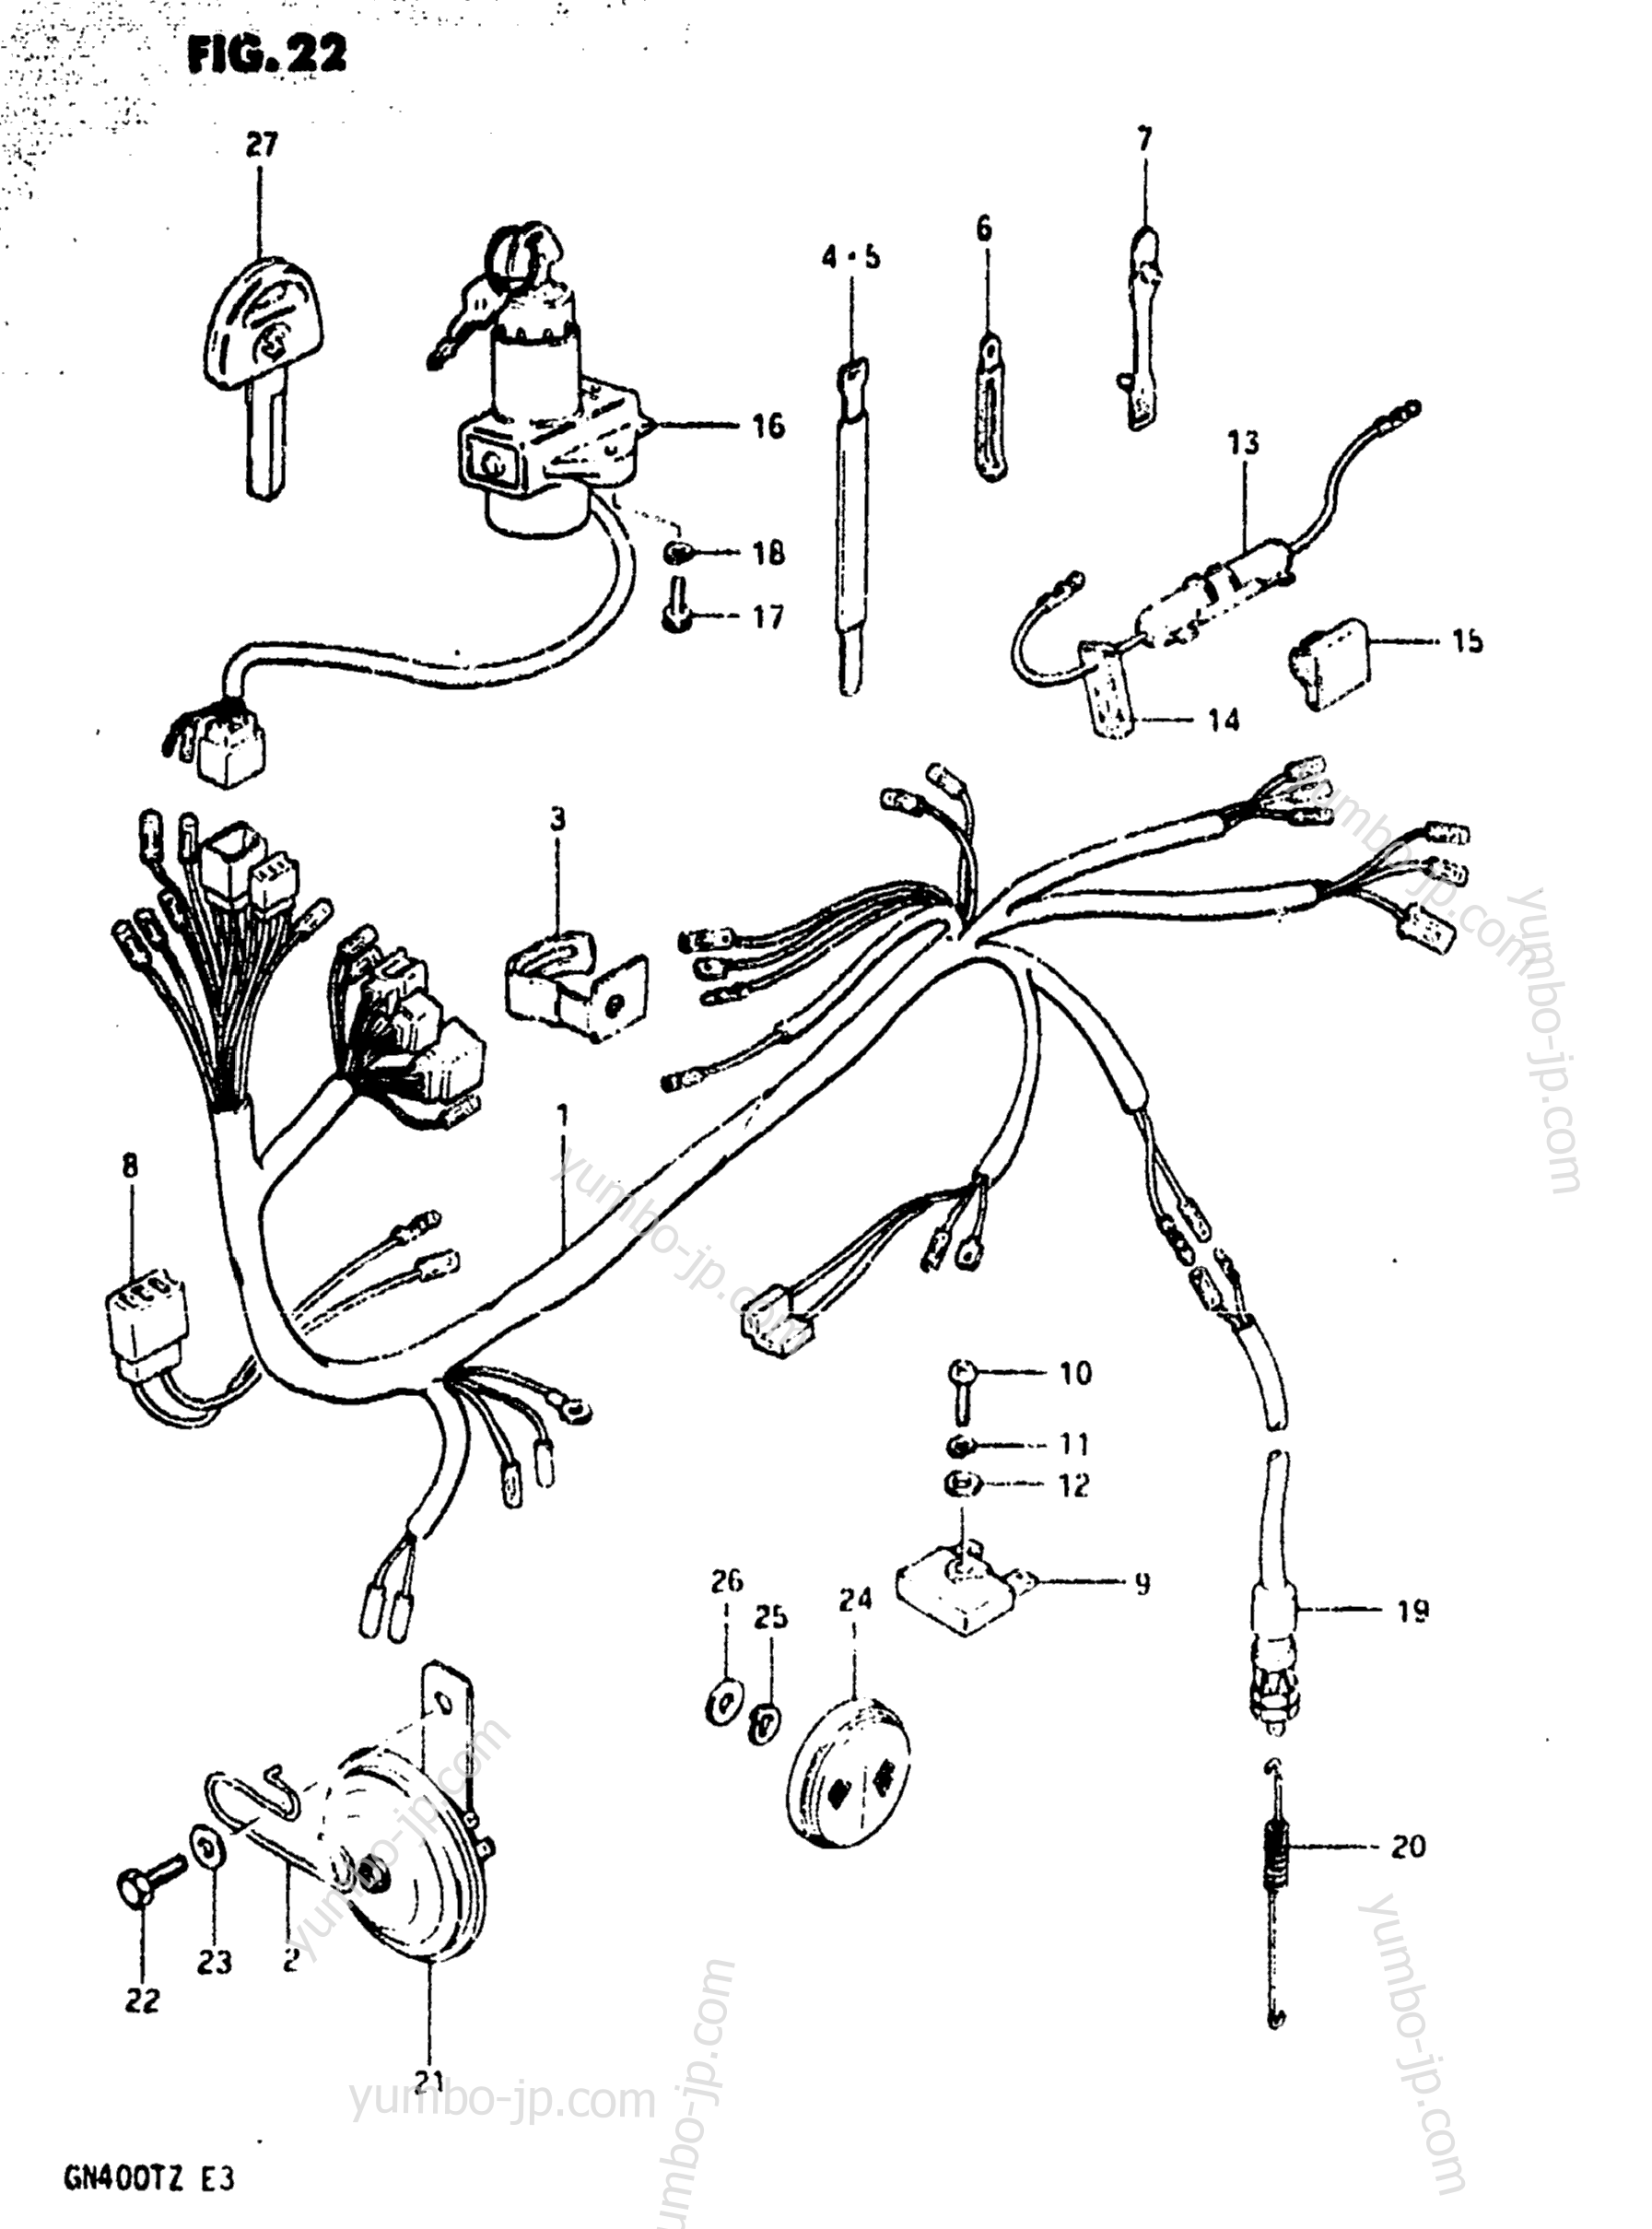 WIRING HARNESS for motorcycles SUZUKI GN400T 1982 year